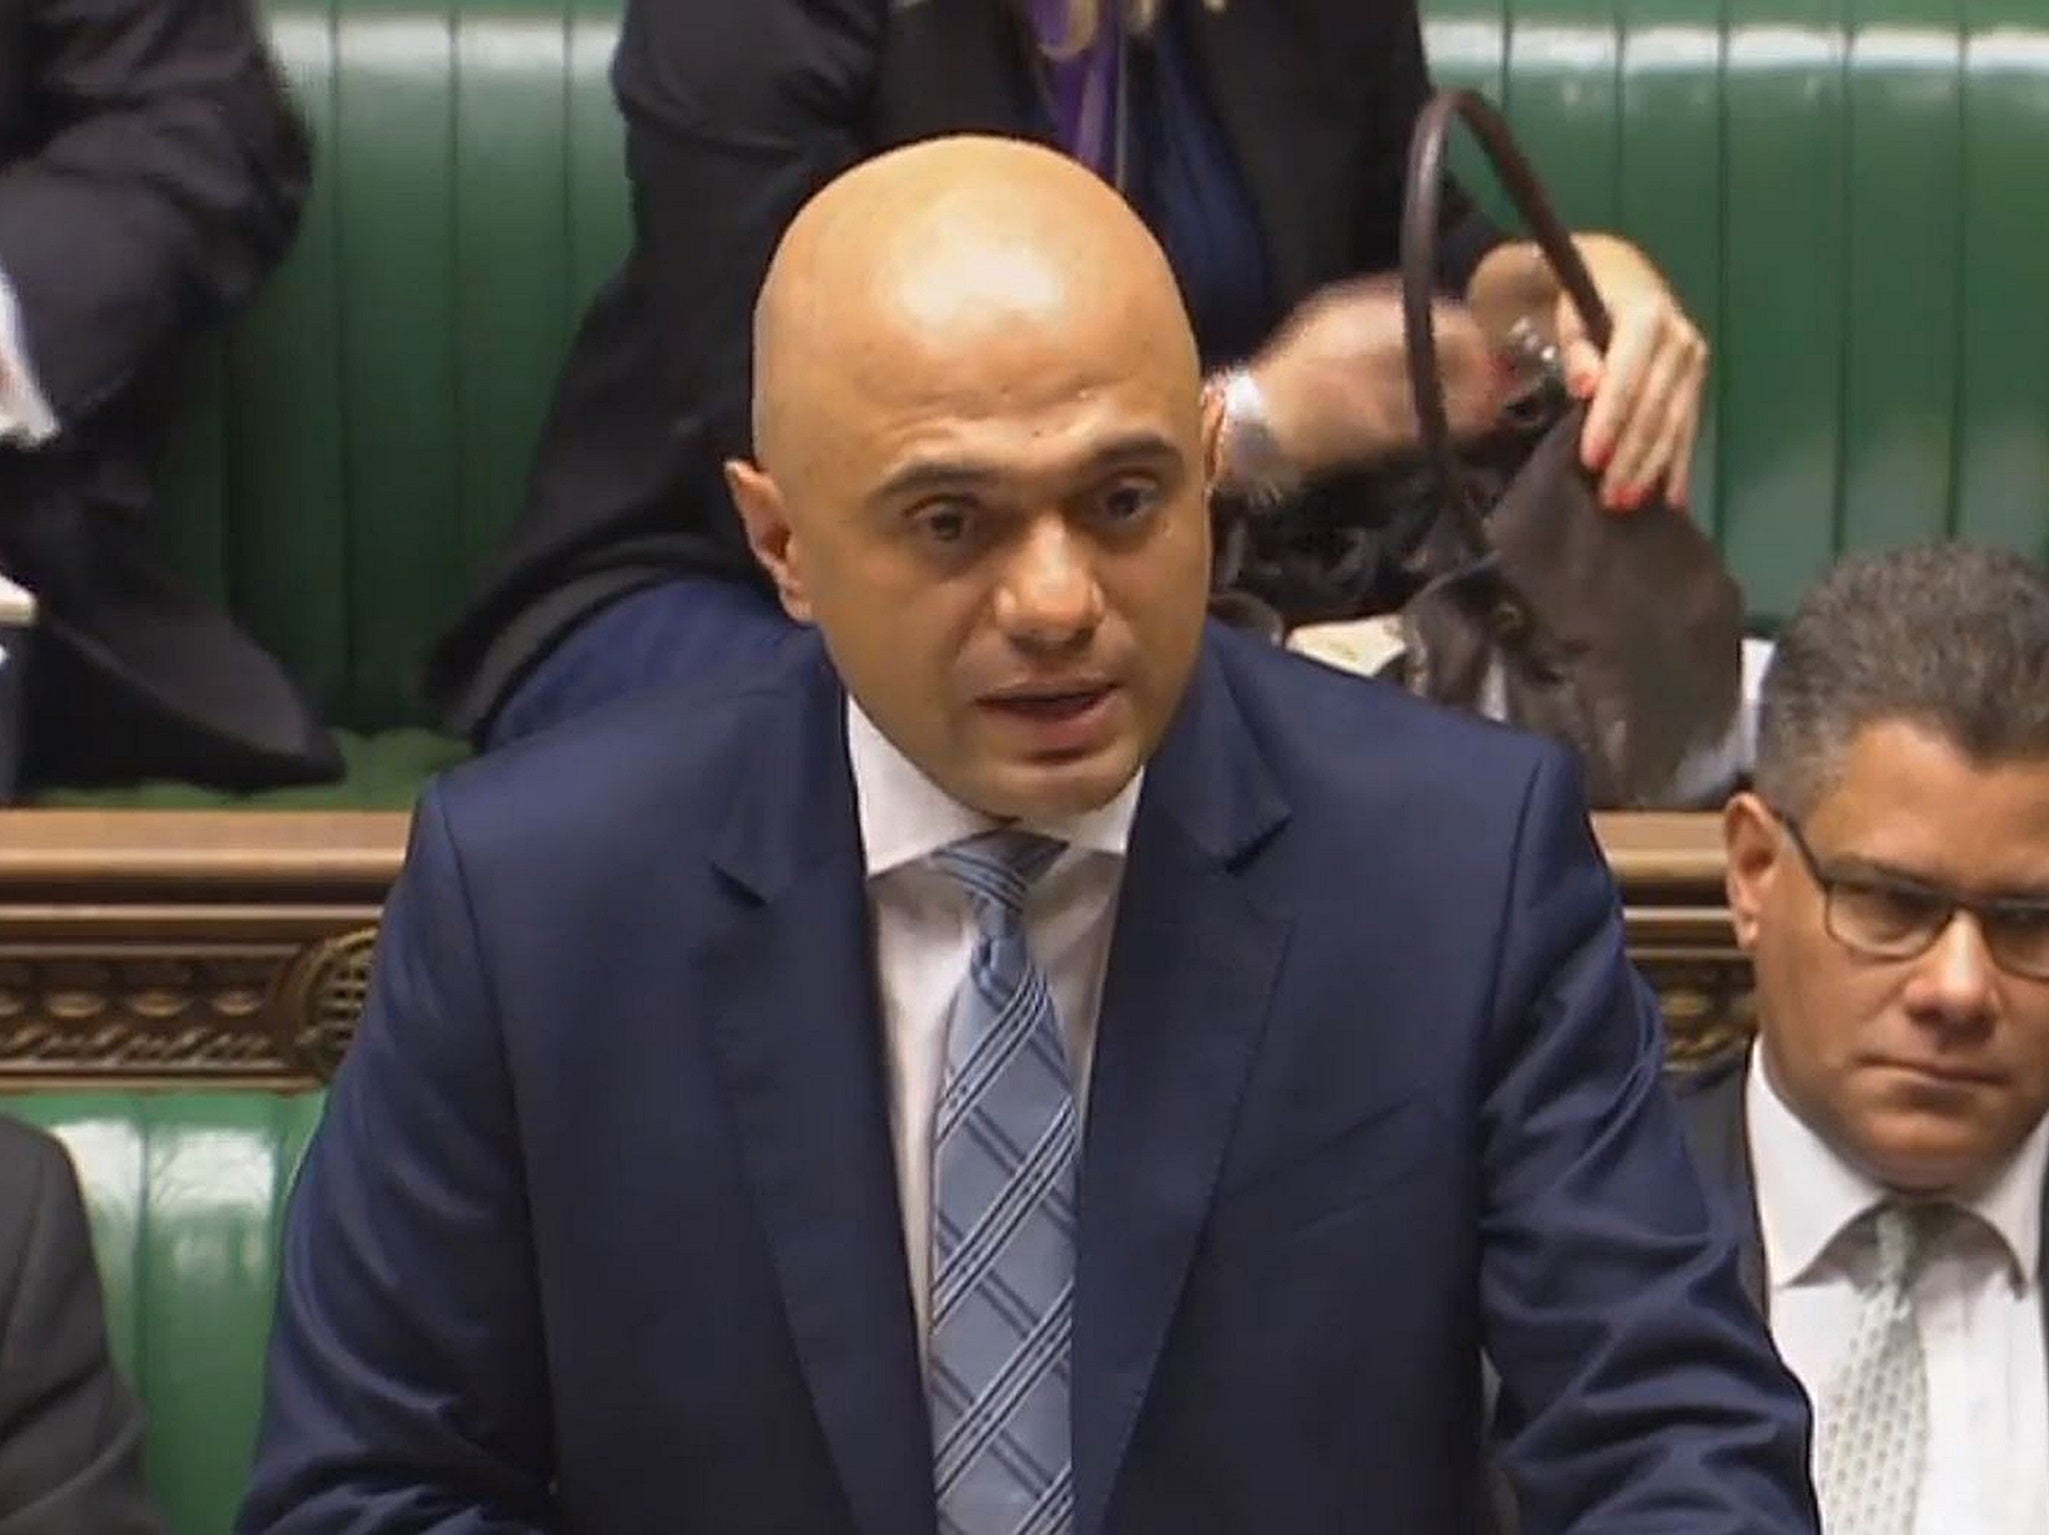 Communities Secretary Sajid Javid has become the latest Muslim MP to receive an abusive letter to his parliamentary office